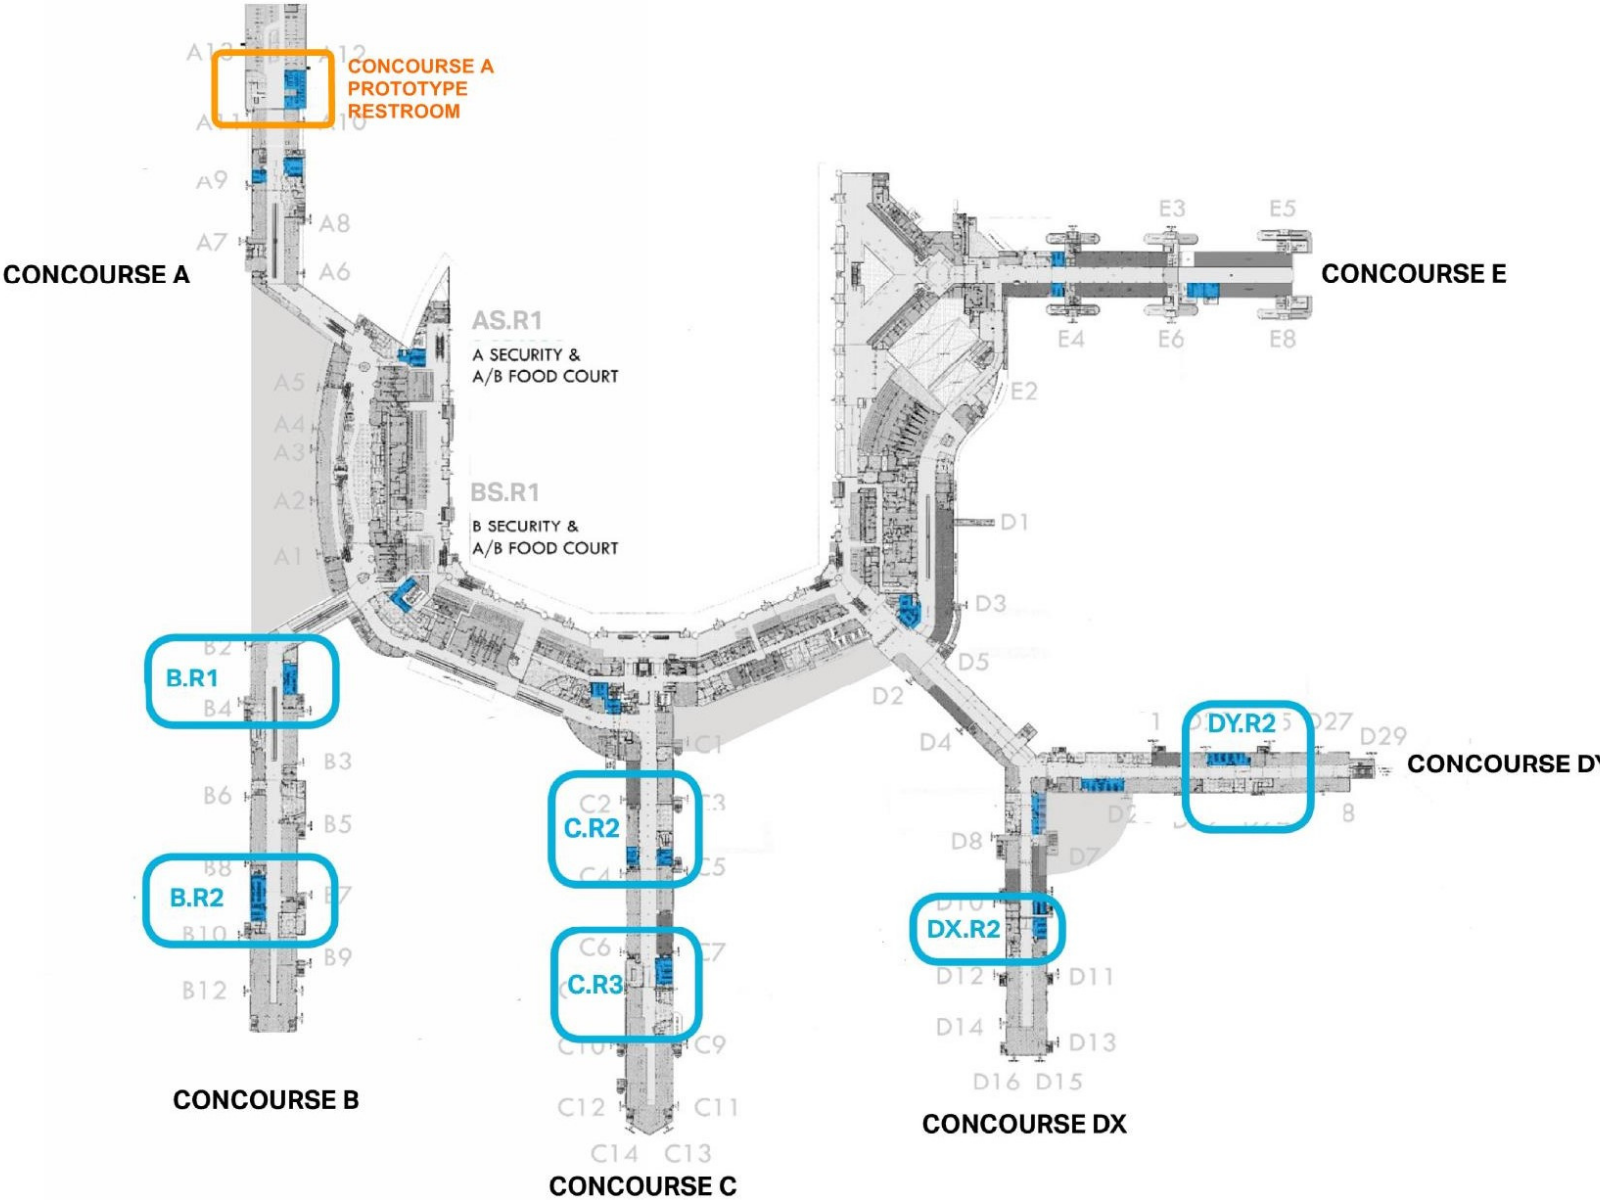 Map detailing restroom locations impacted by restroom renovations program at BWI Marshall Airport